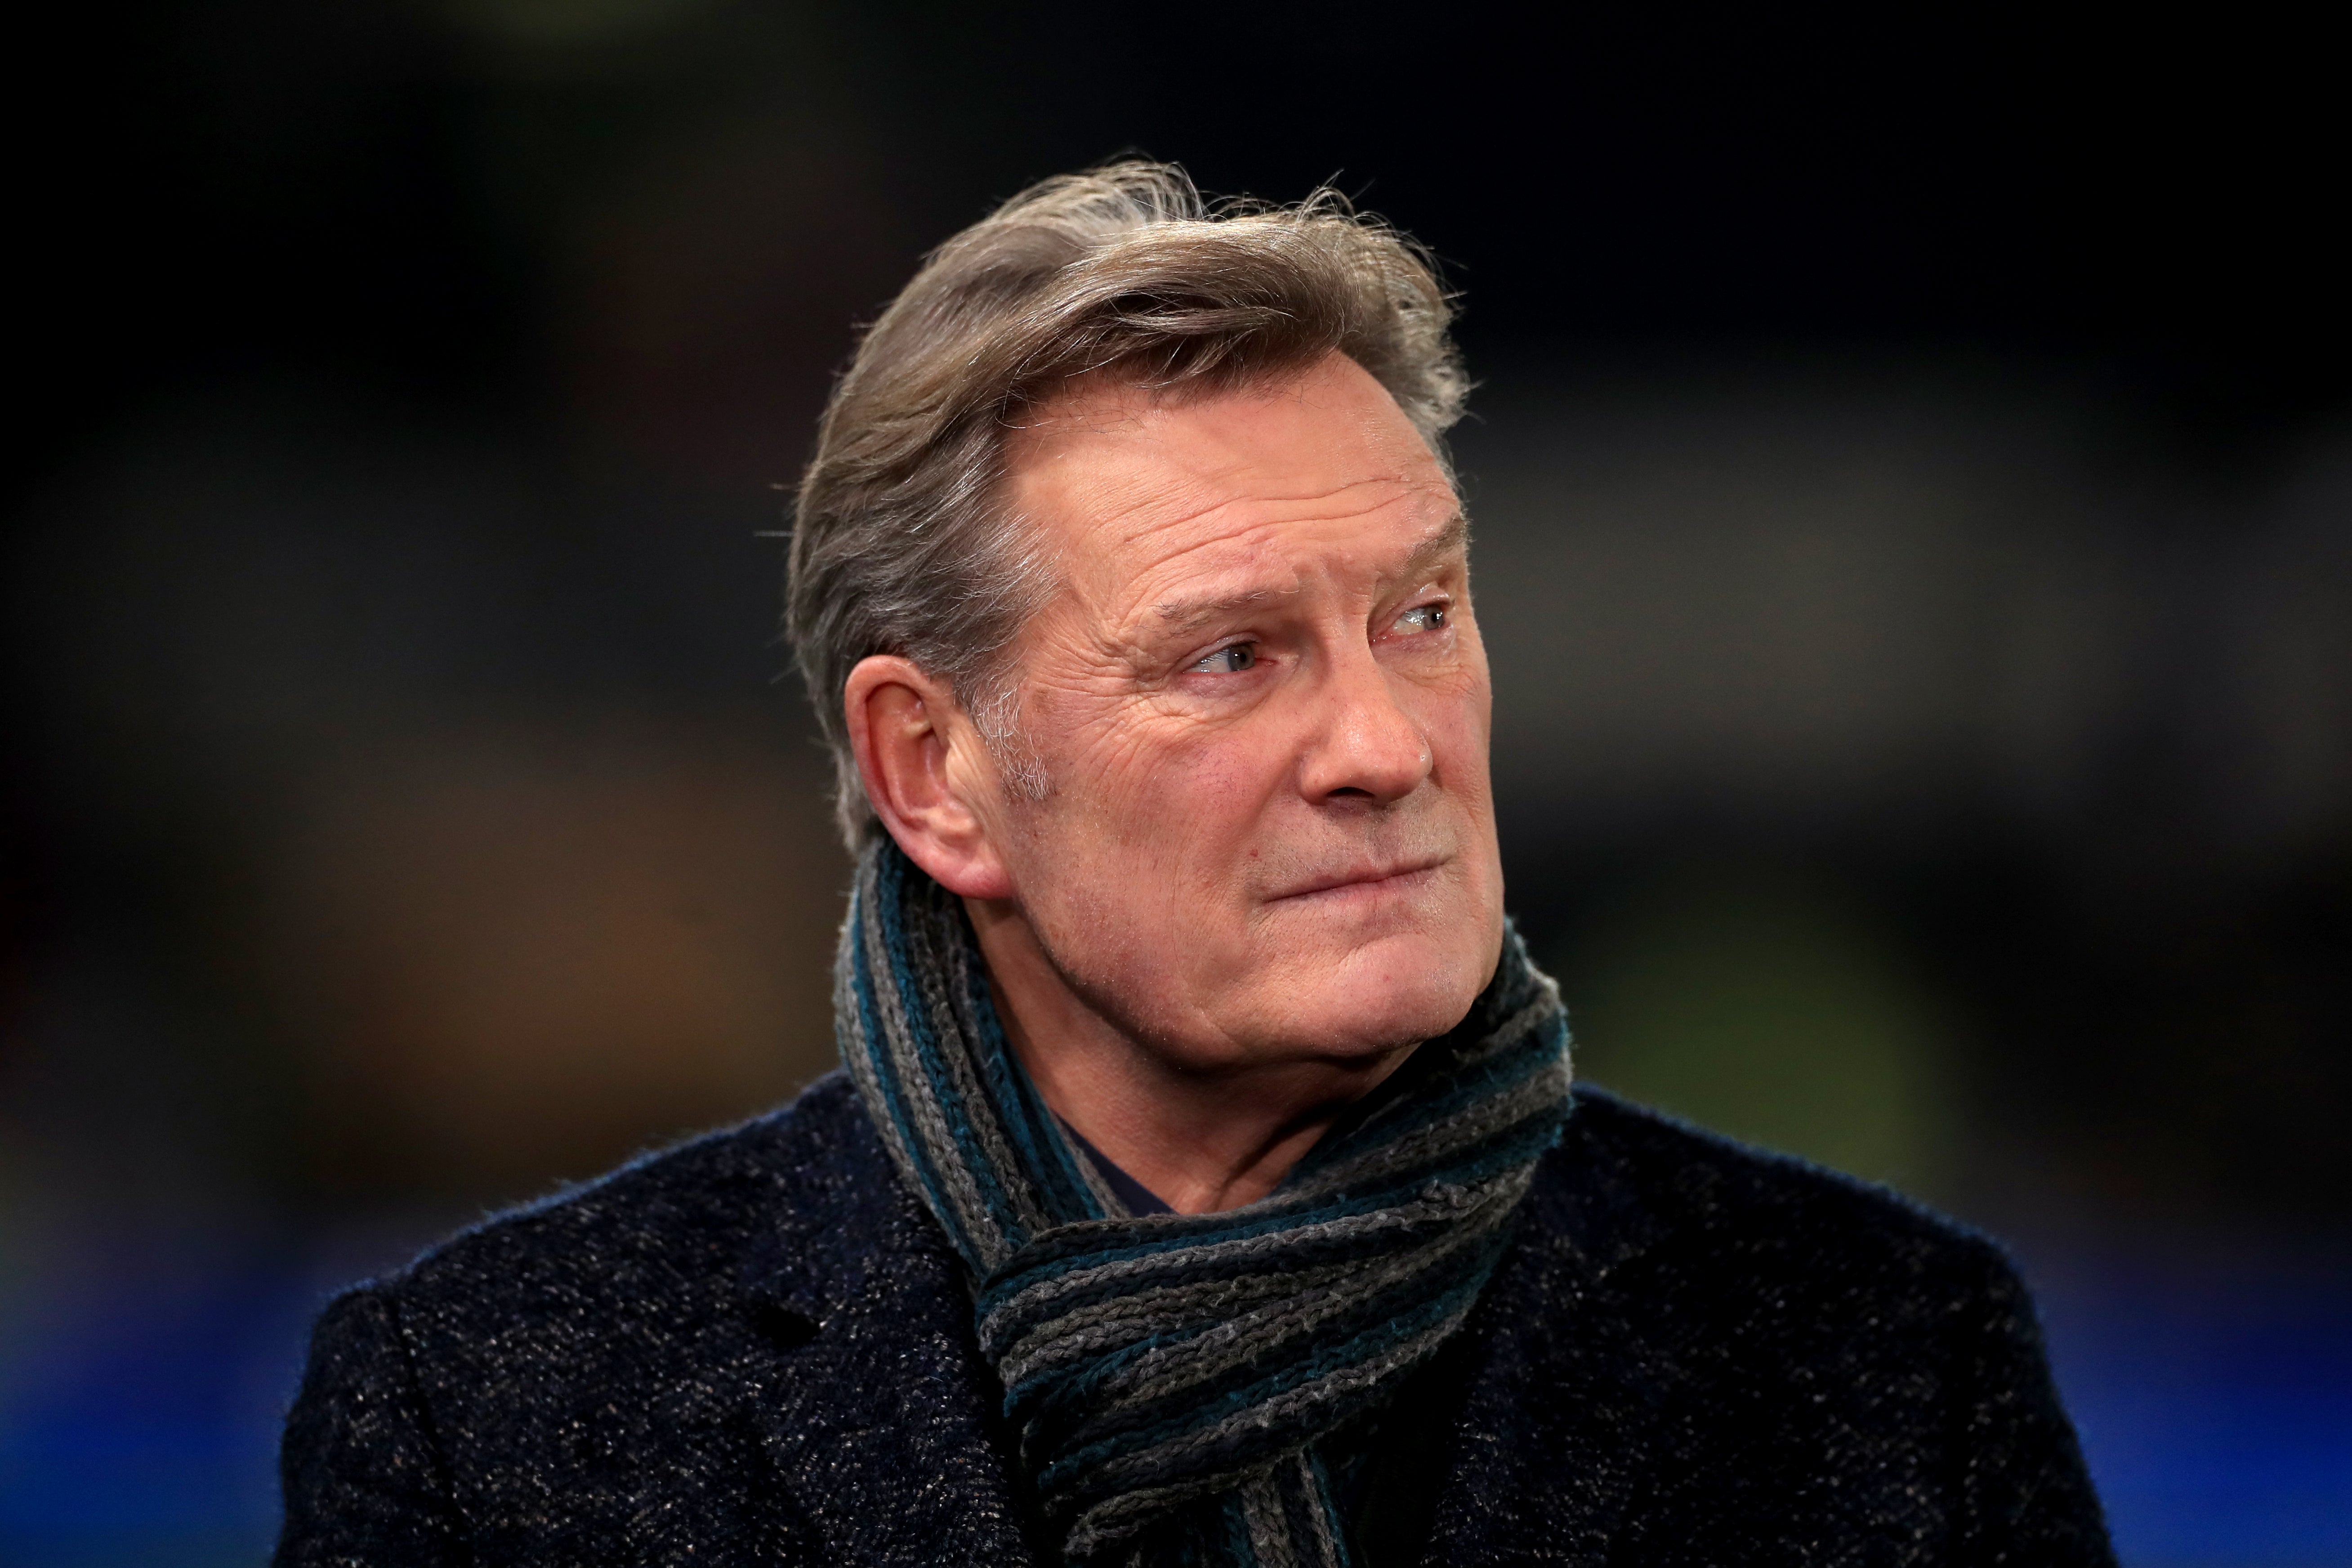 Glenn Hoddle, pictured, hopes Antonio Conte is given the backing to succeed at Spurs (Mike Egerton/PA)